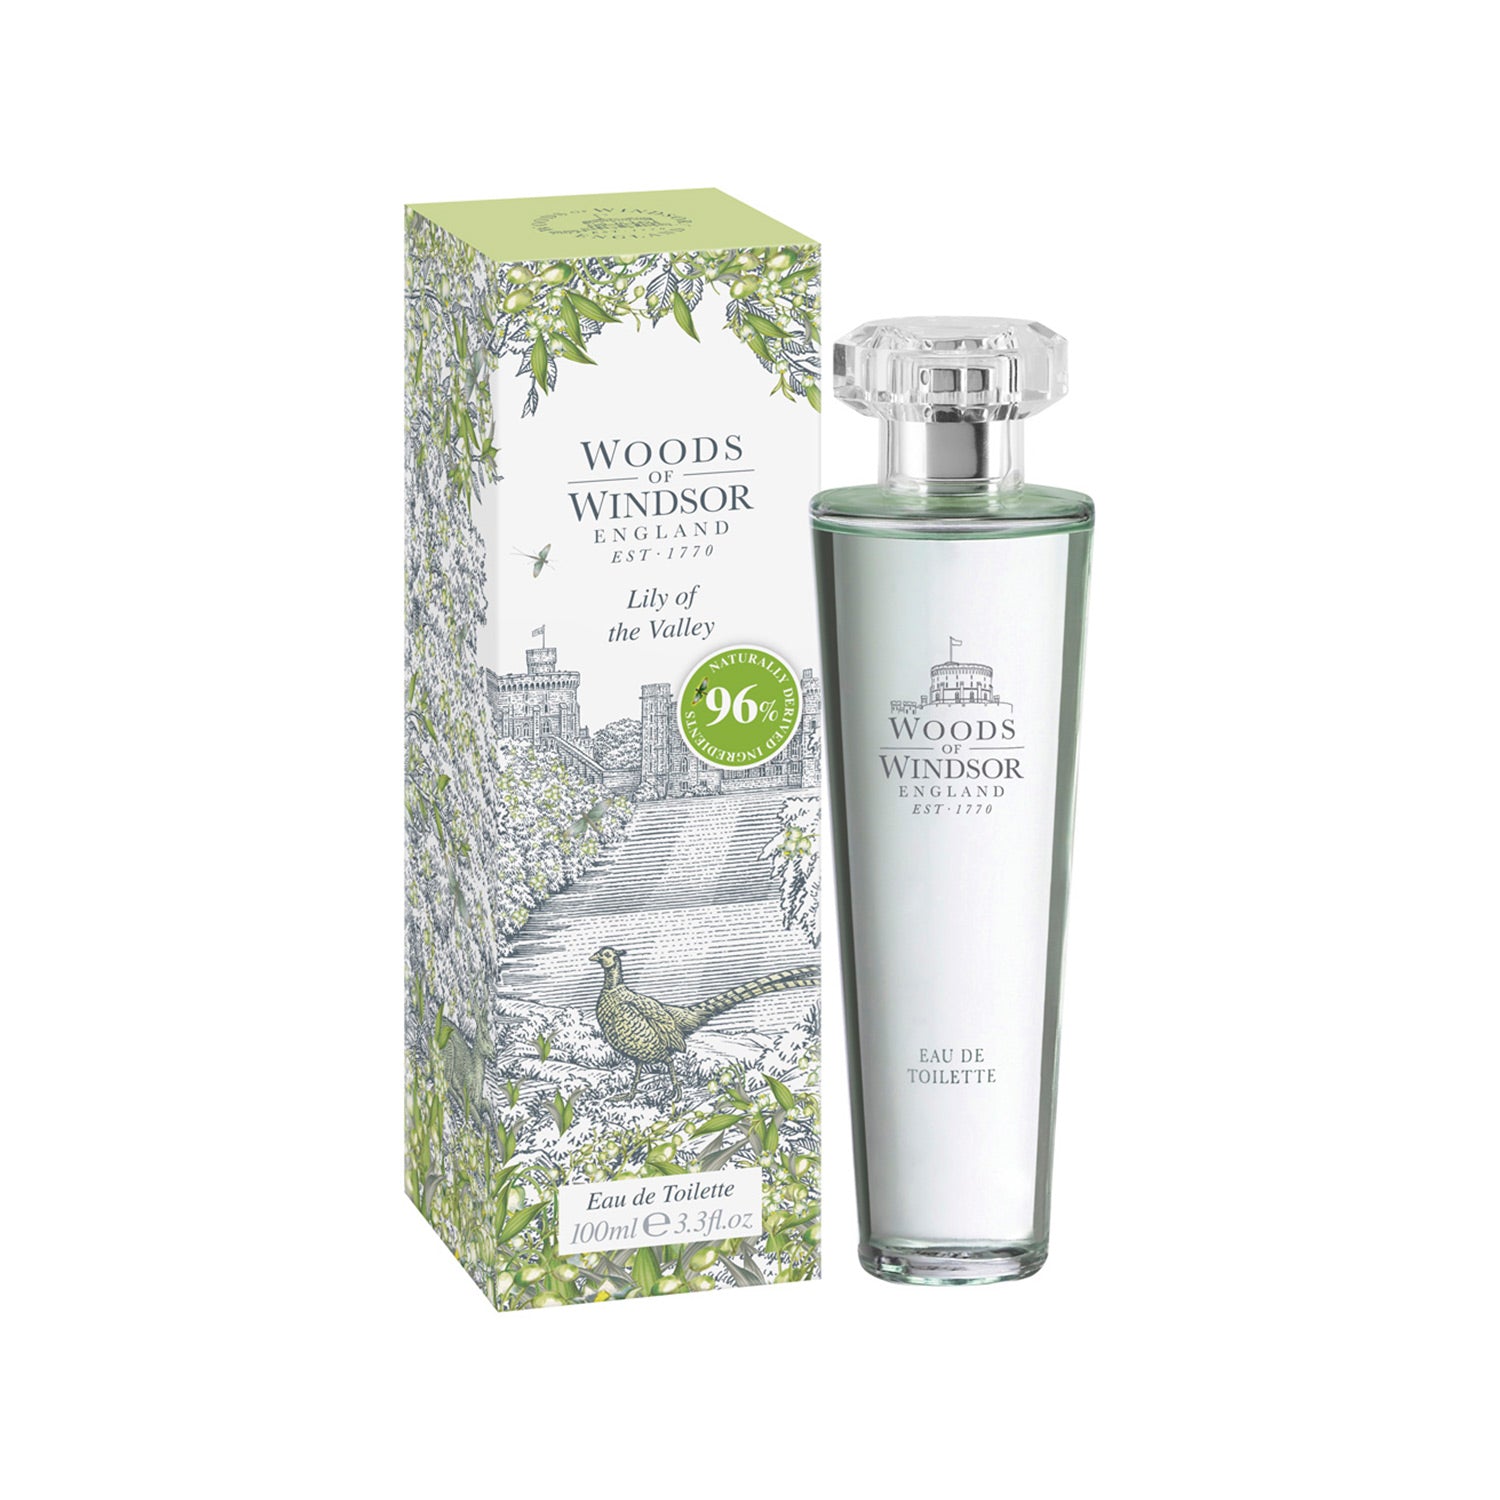 Lily of the Valley EDT/Eau de Toilette Perfume for her